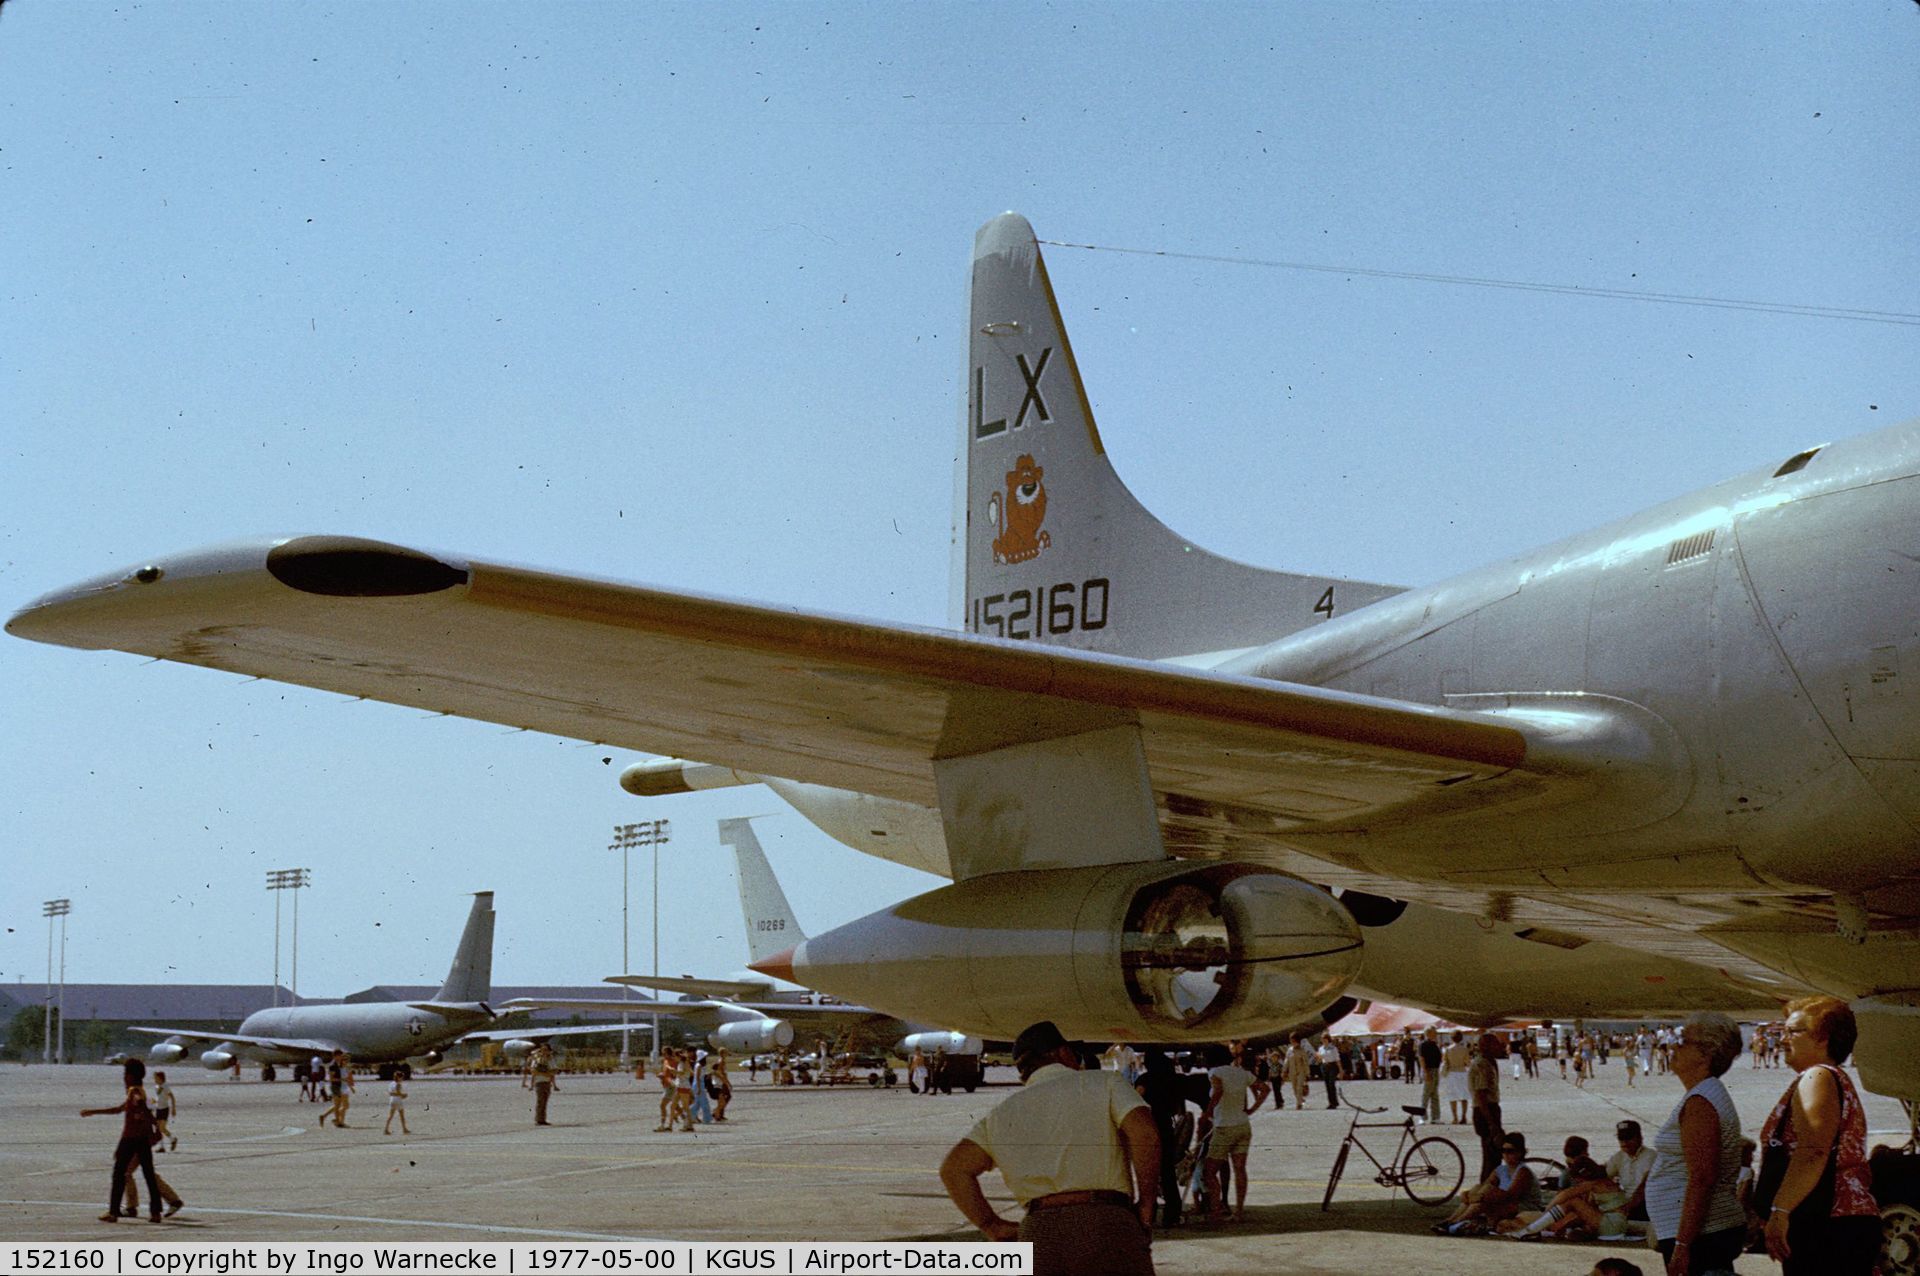 152160, Lockheed P-3A Orion C/N 185-5130, Lockheed P-3A Orion of the US Navy at the 1977 airshow at Grissom AFB, Peru IN